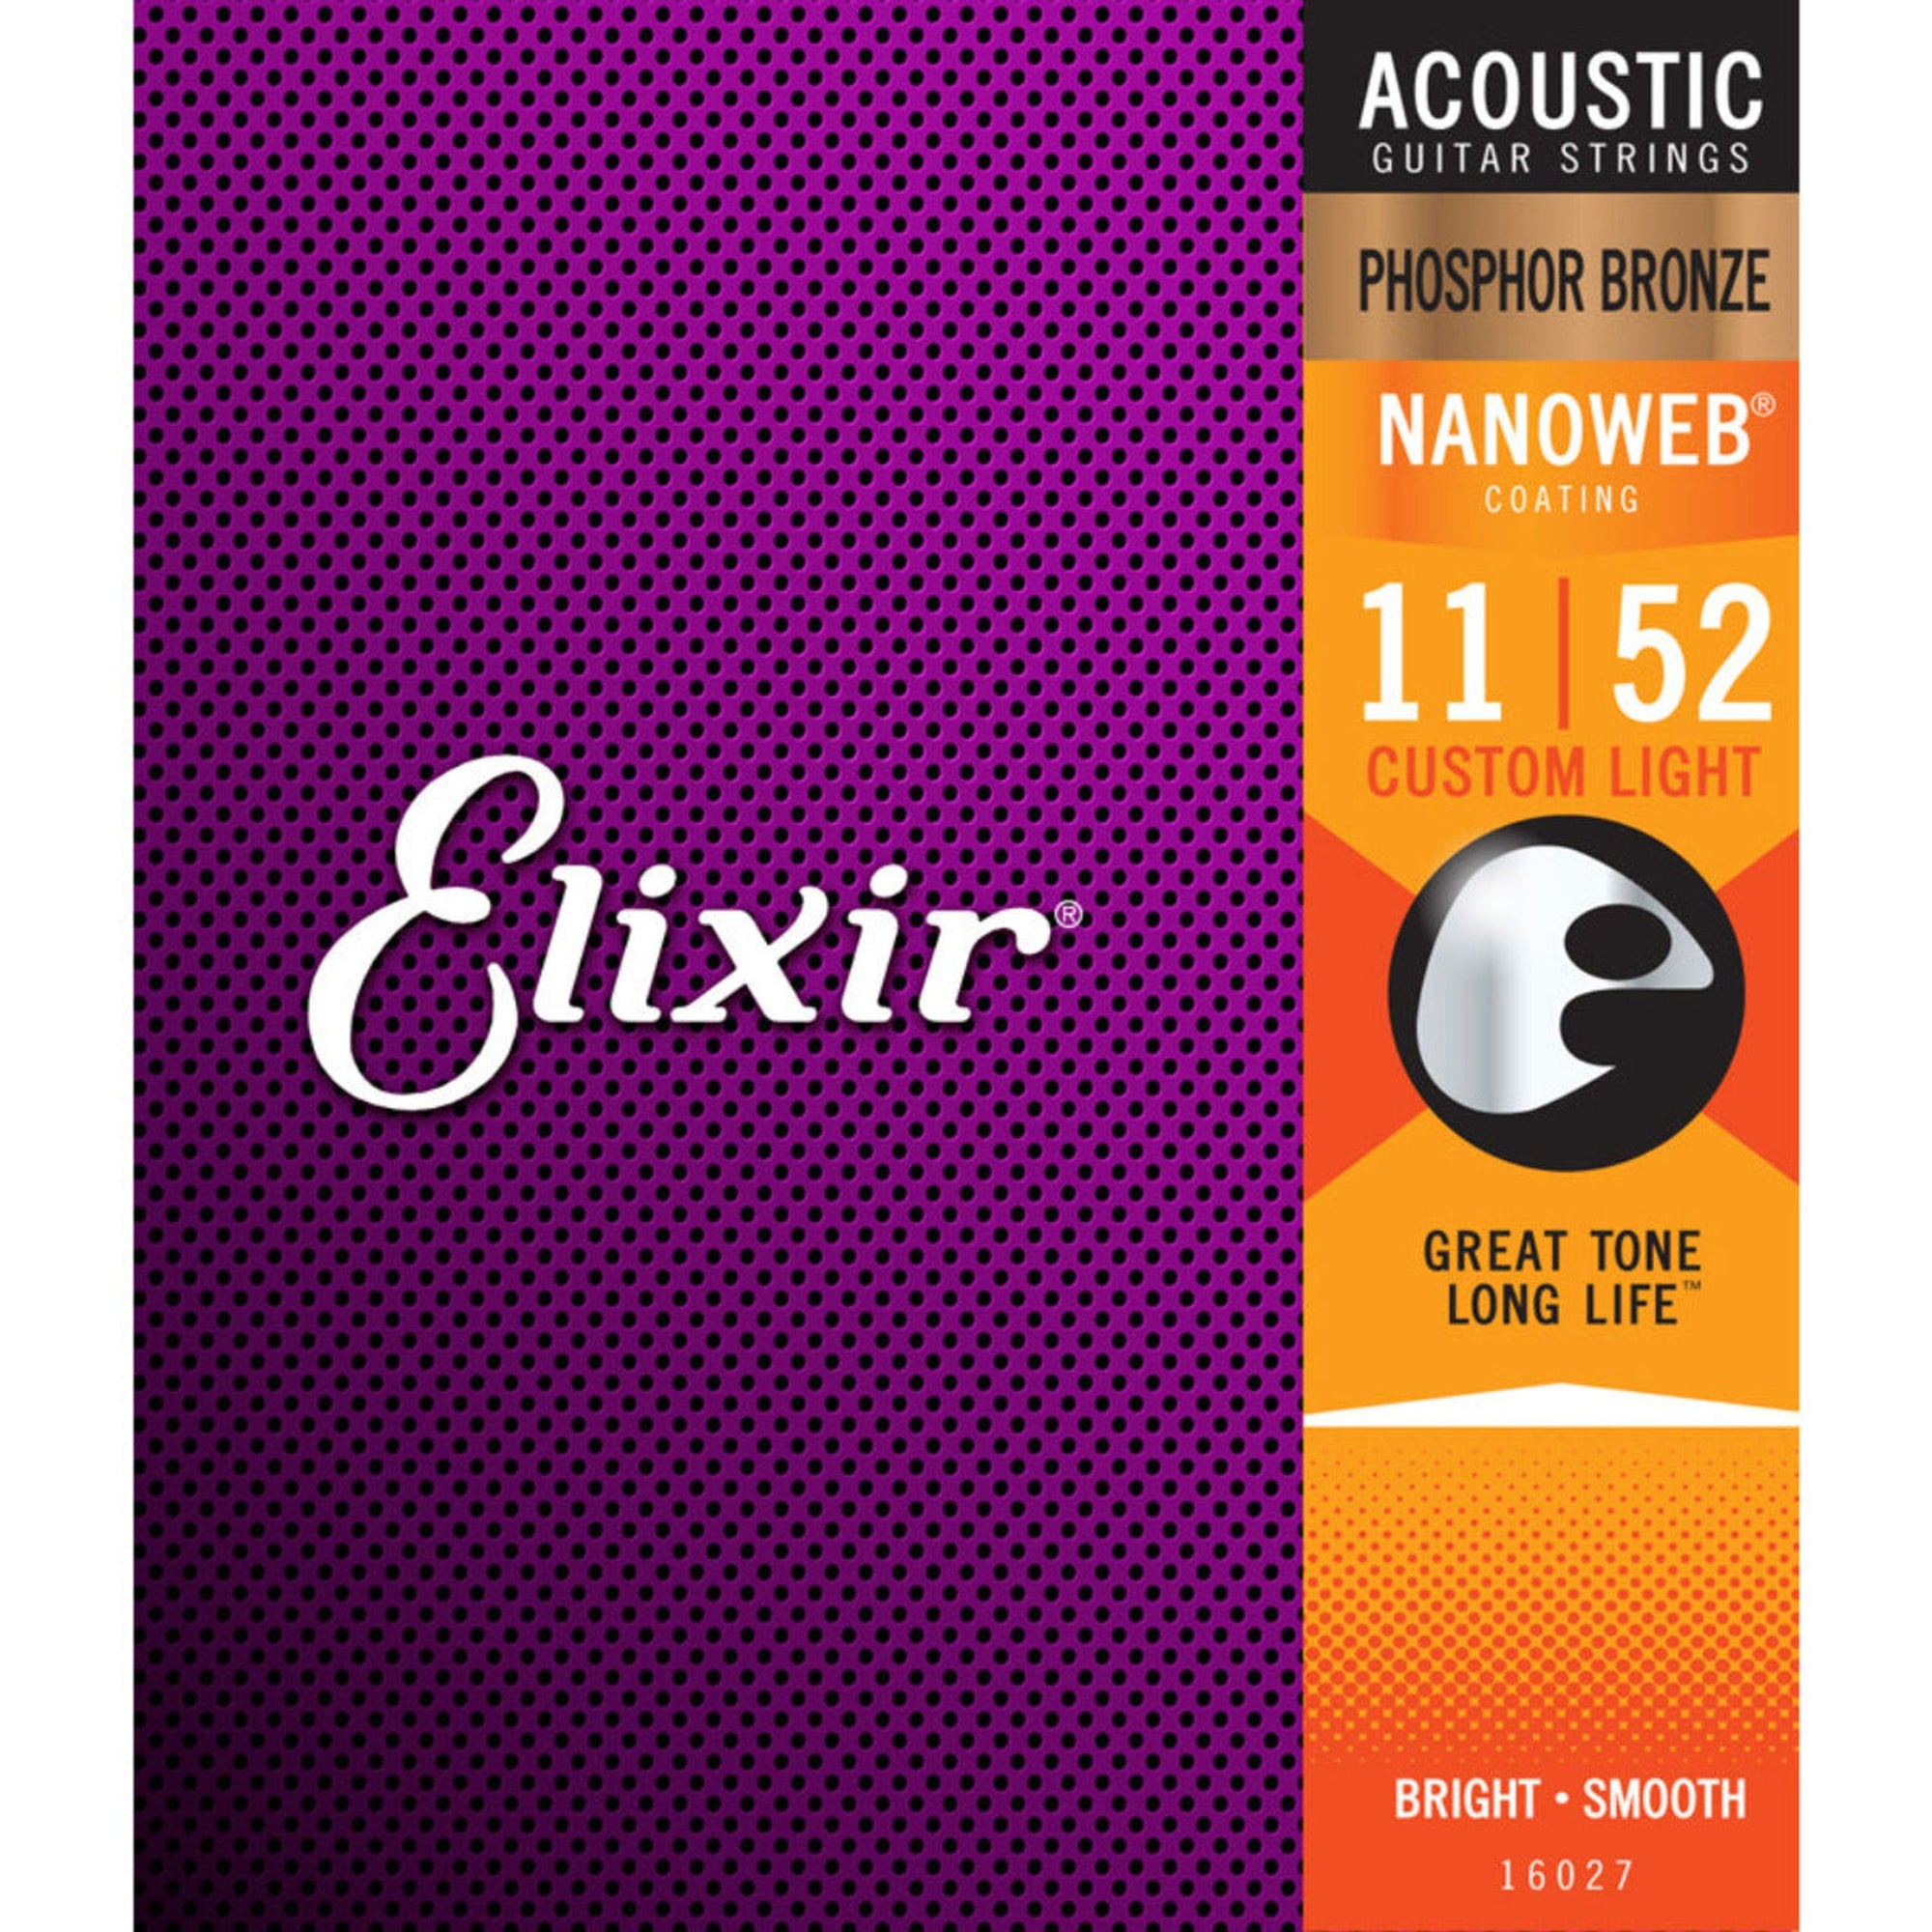 The Elixir 16027 strings are known for their great tone and long life. Elixir strings amp up your guitar’s tone life with the same premium electric guitar strings that experienced players worldwide